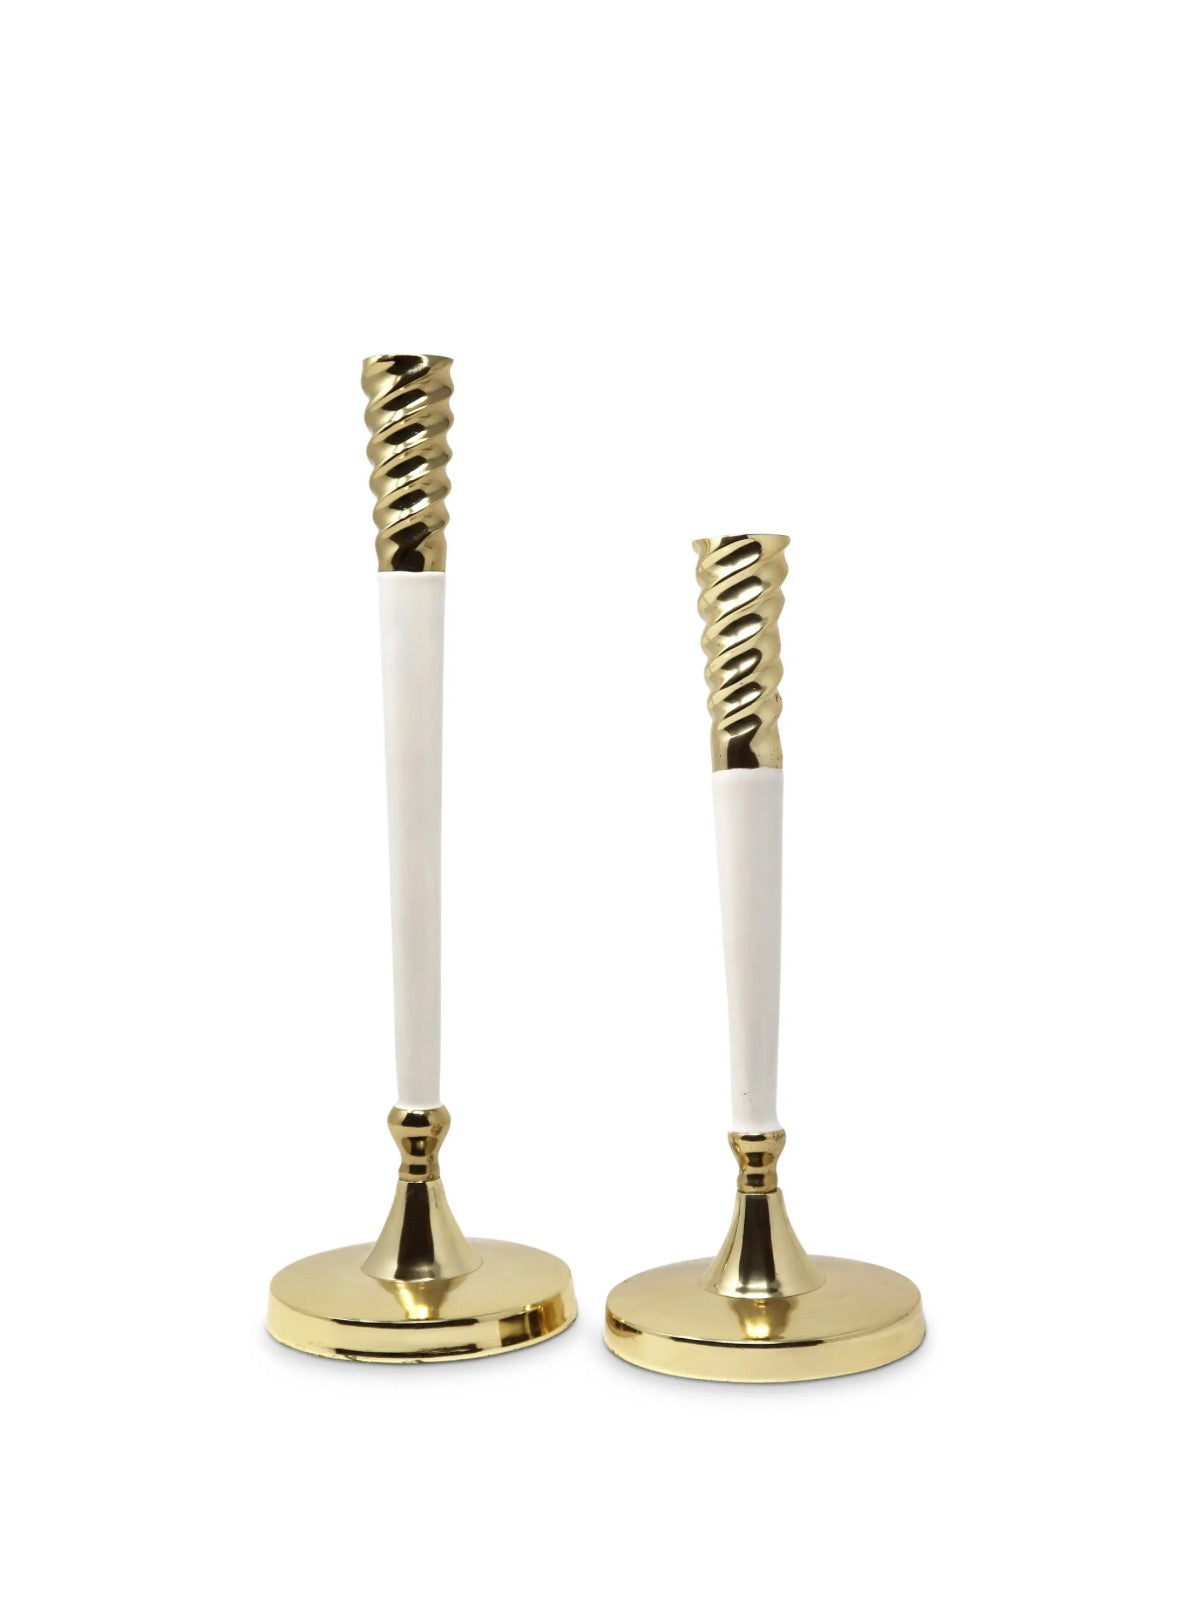 White and Twisted Gold Taper Stainless Steel Candle Holder, available in 2 Sizes.